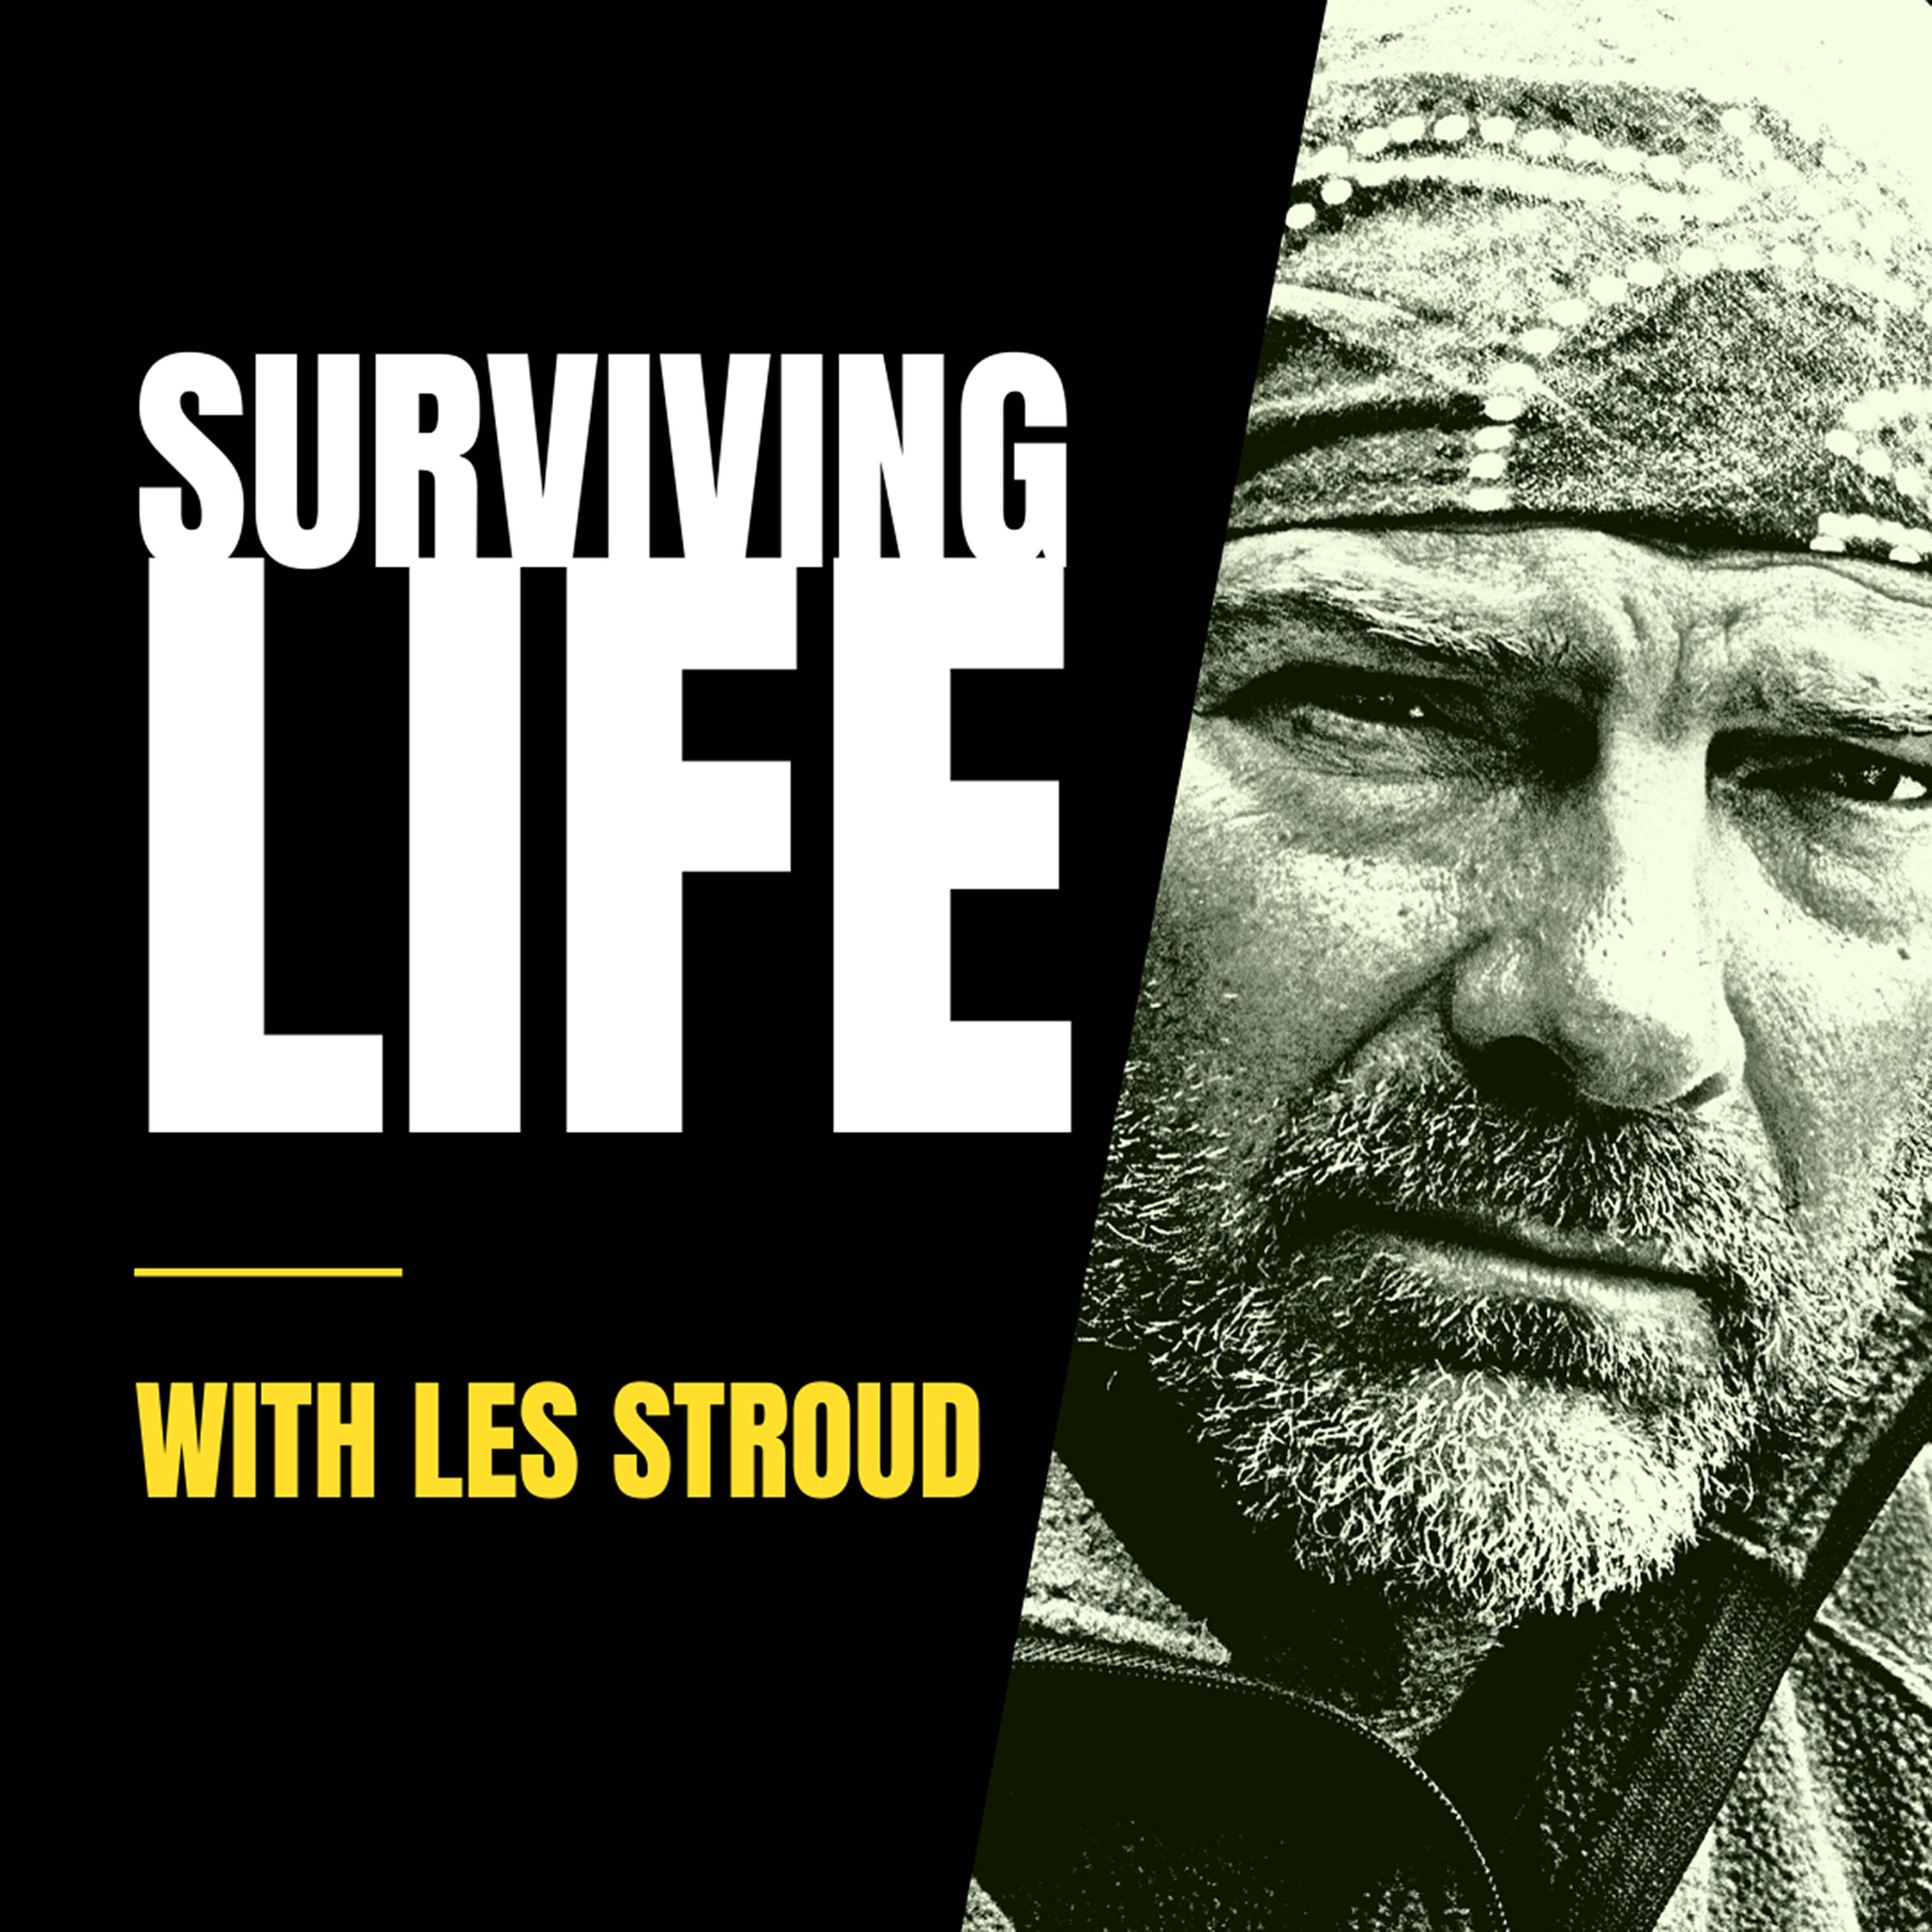 Welcome to Surviving Life with Les Stroud